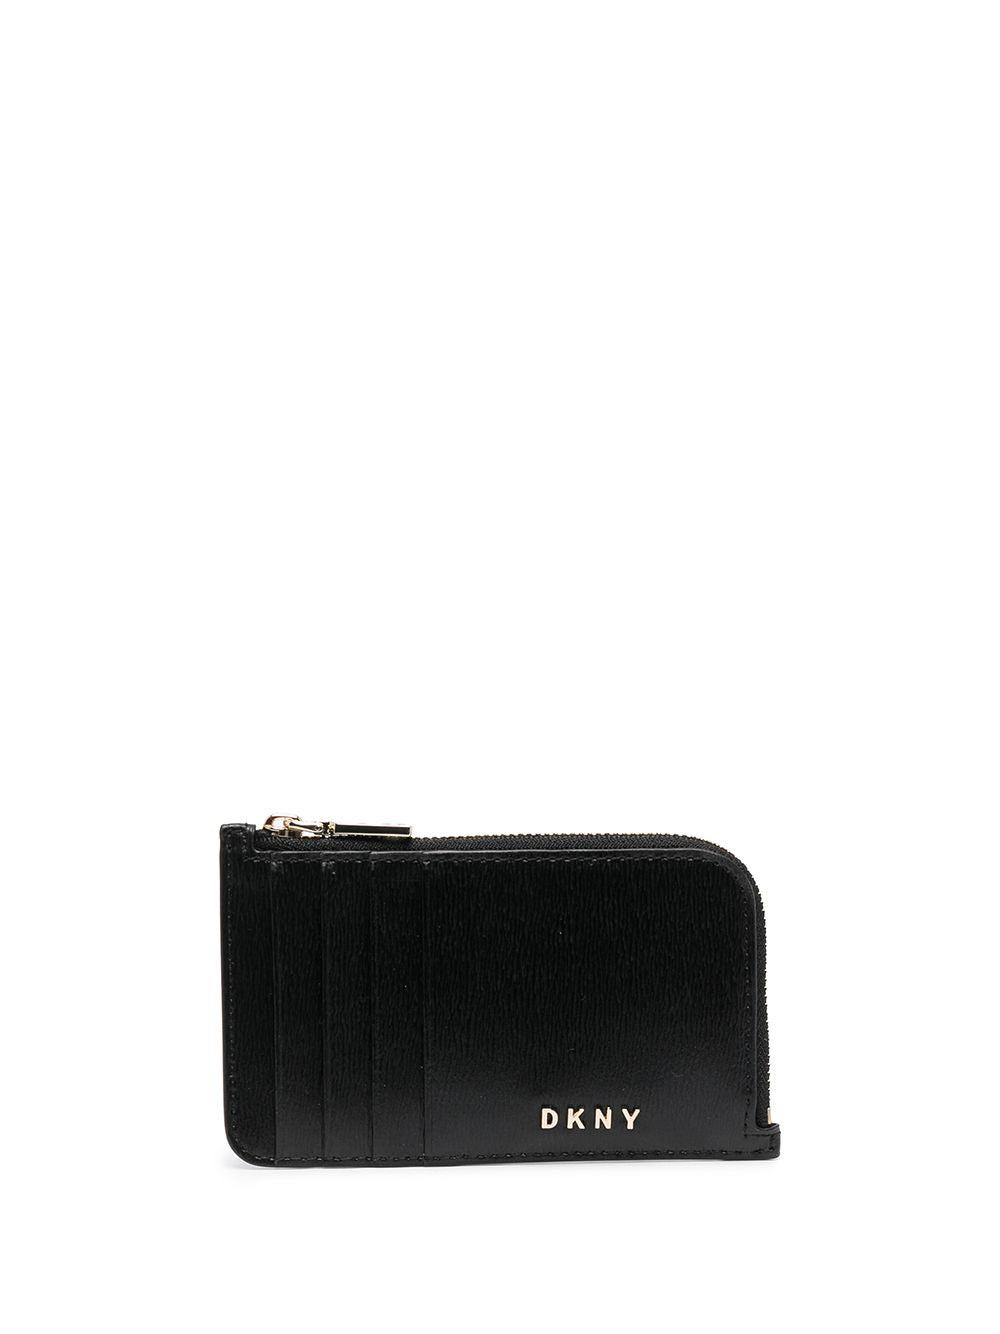 DKNY Bryant Leather Credit Card Case in Black - Save 33% | Lyst